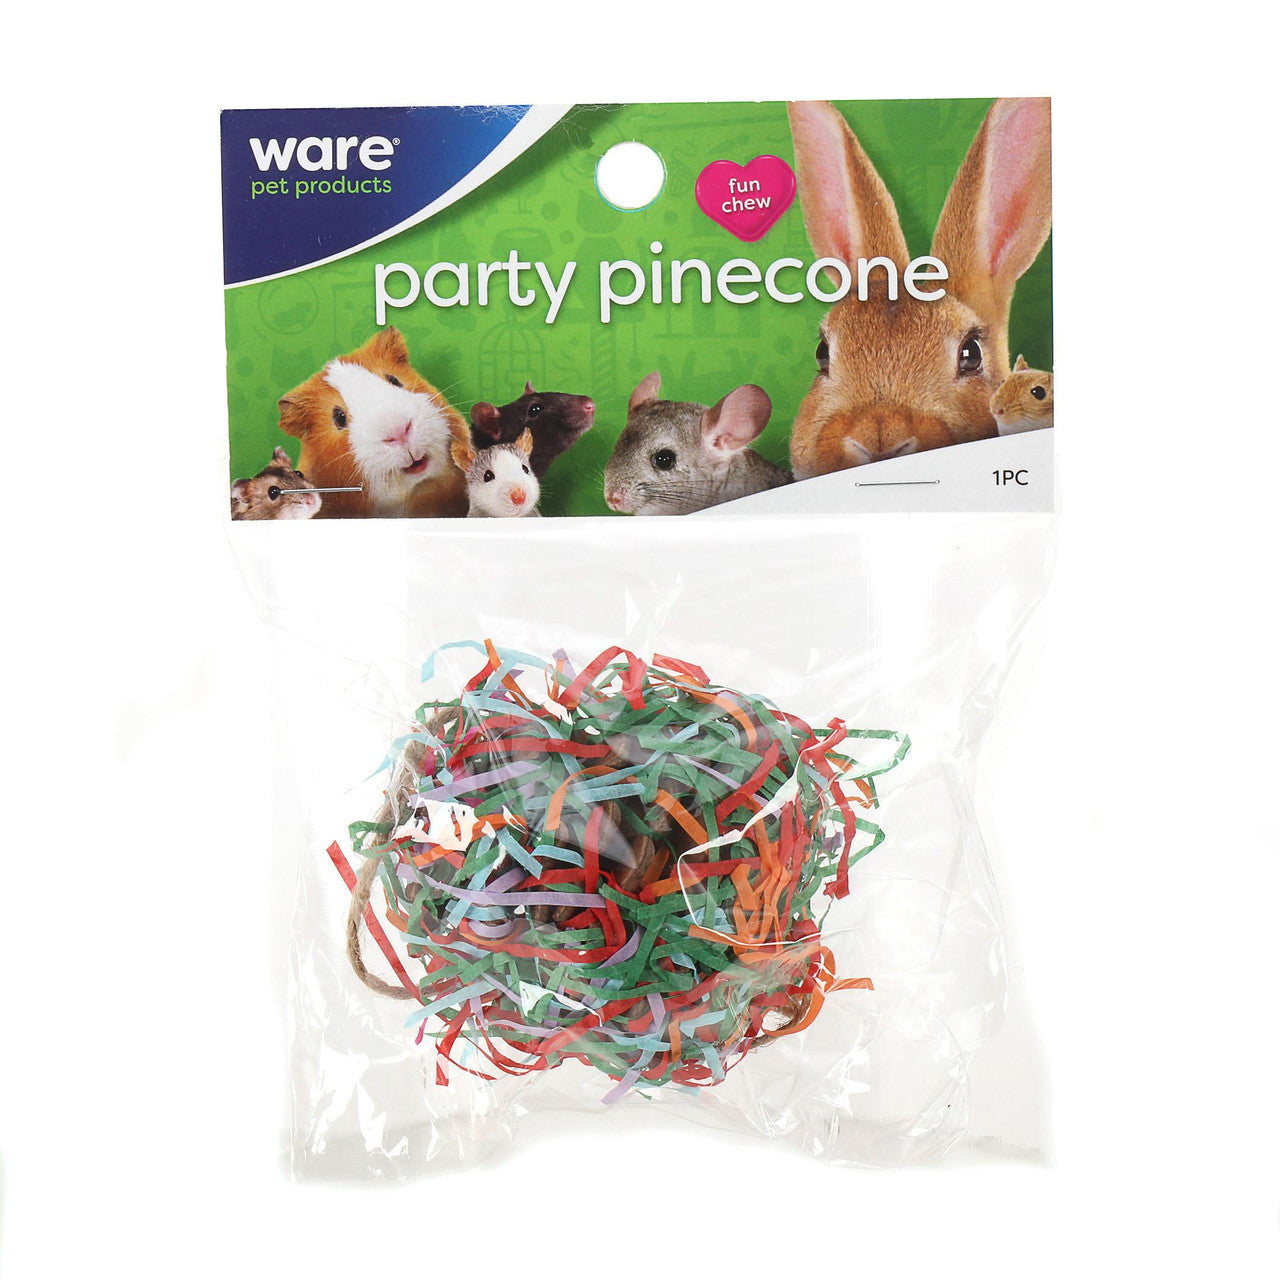 Ware Party Pine Cone Toy 791611102909